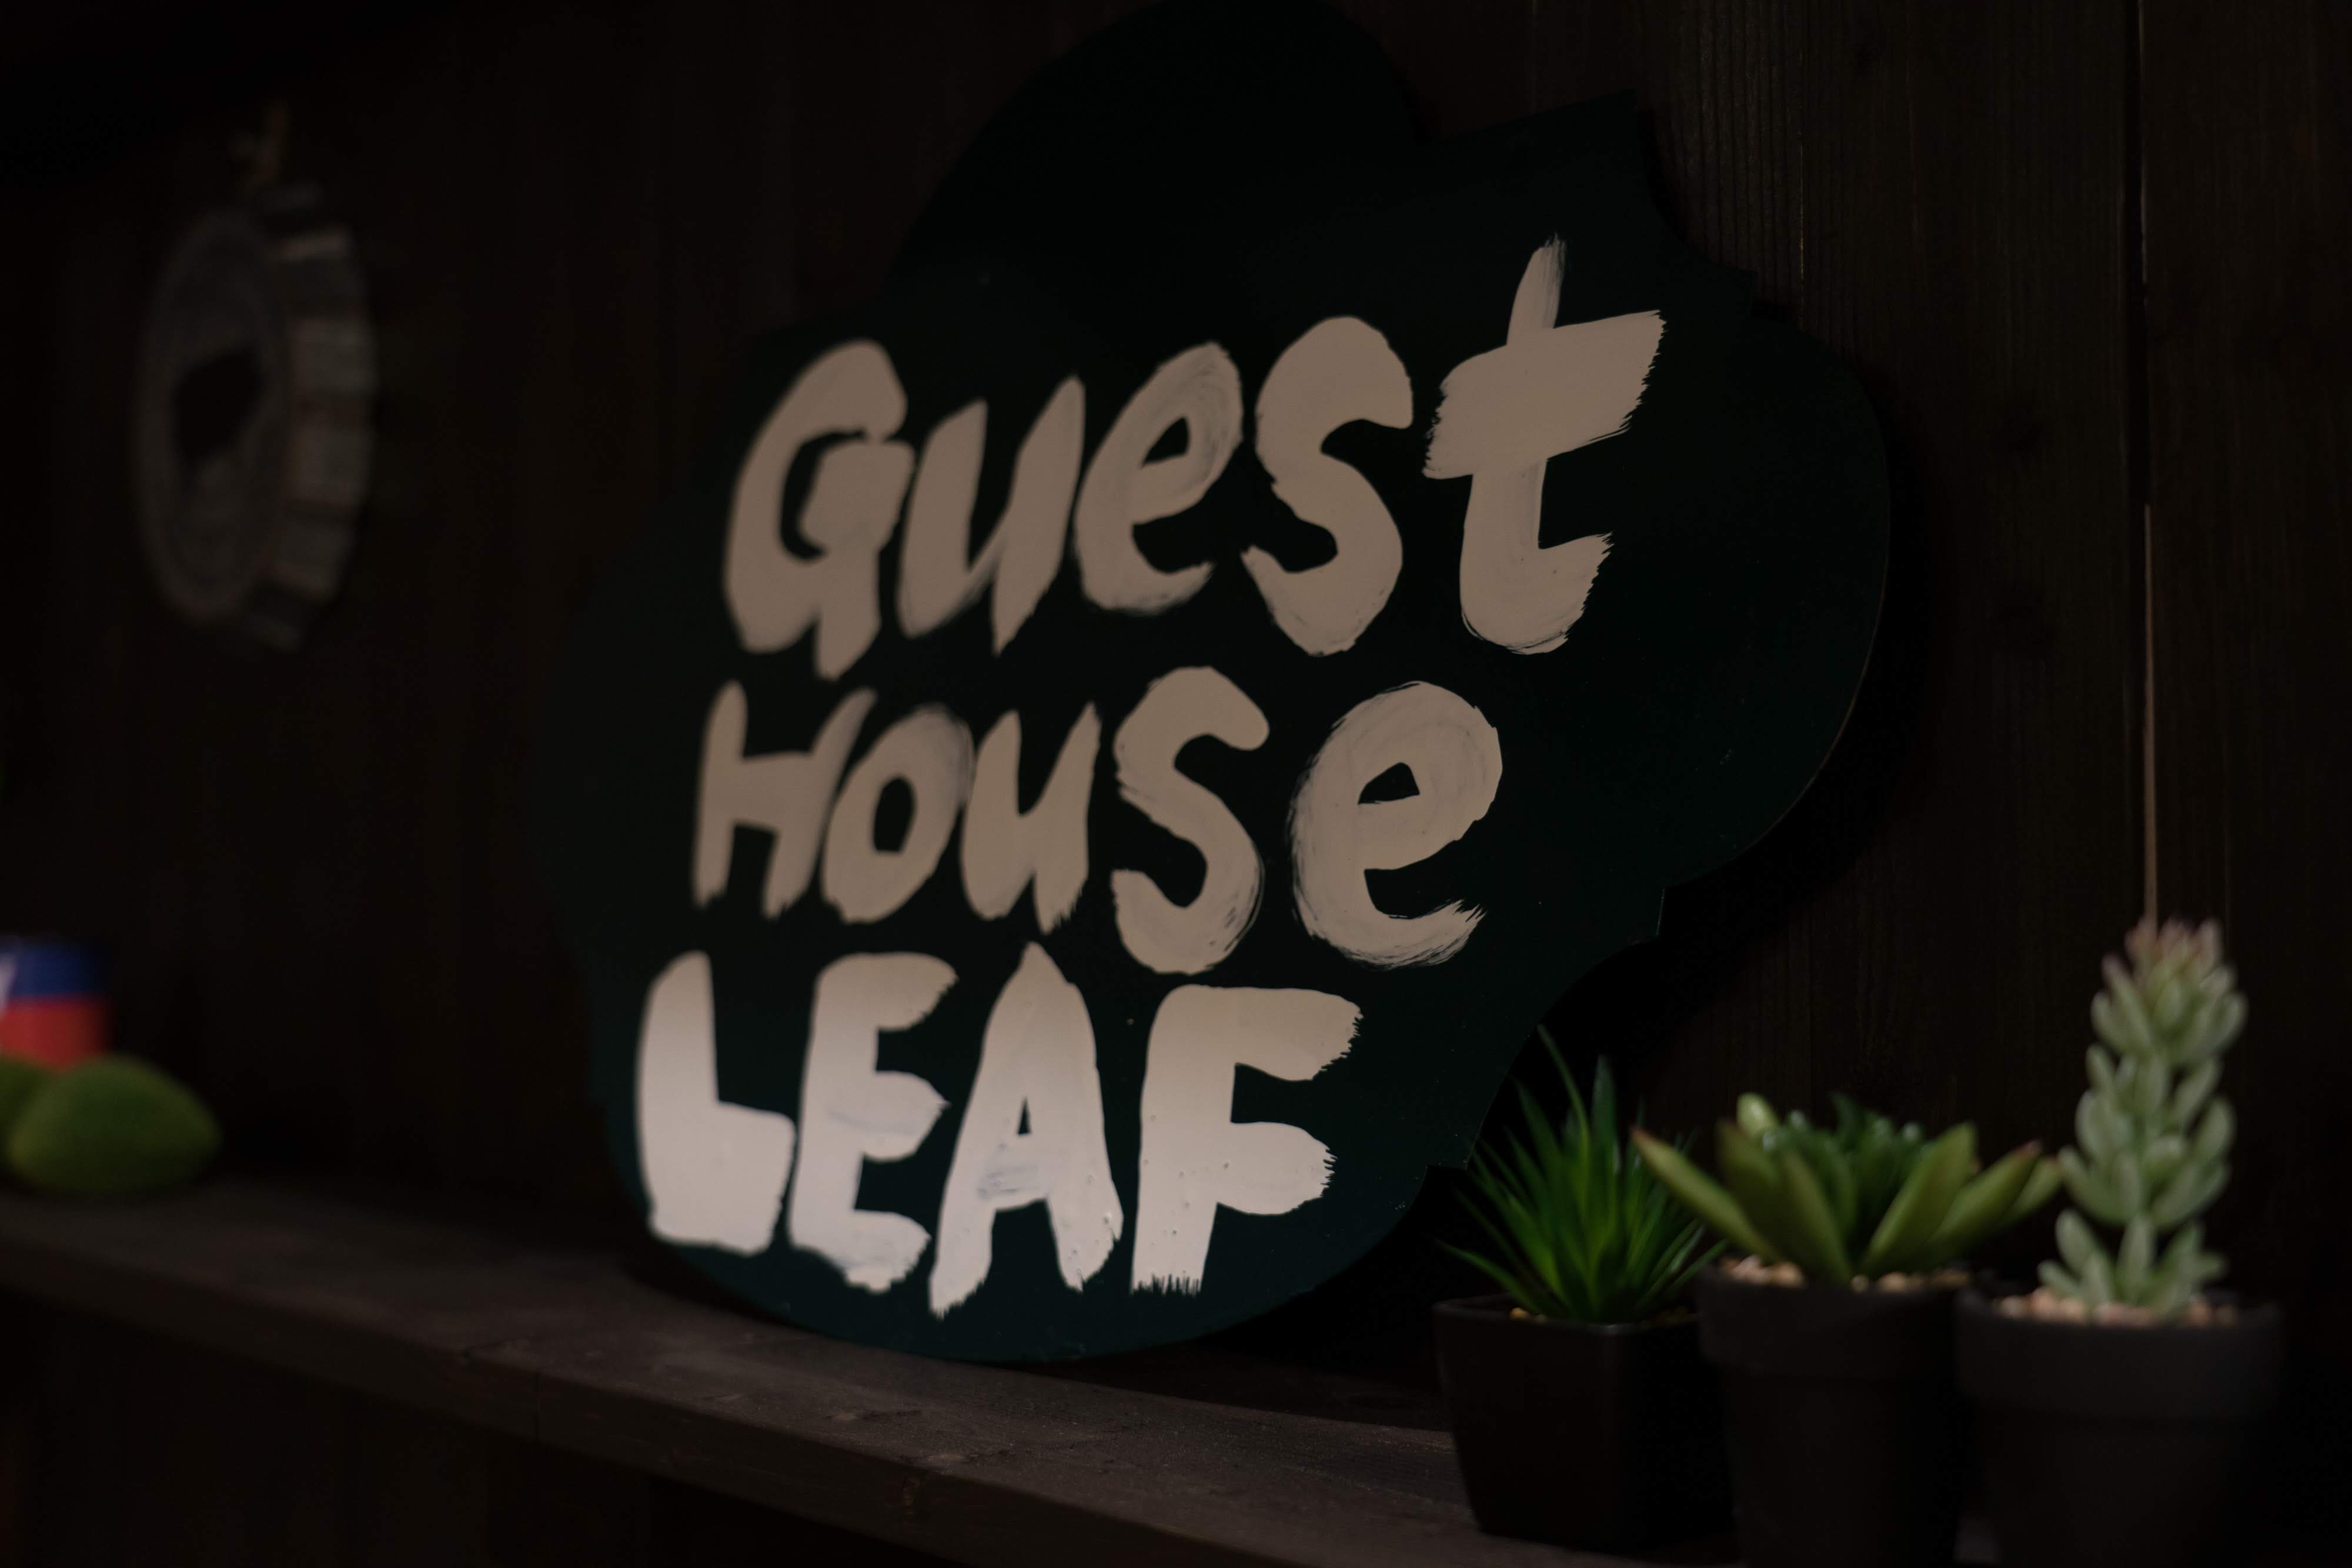 Guesthouse Leaf